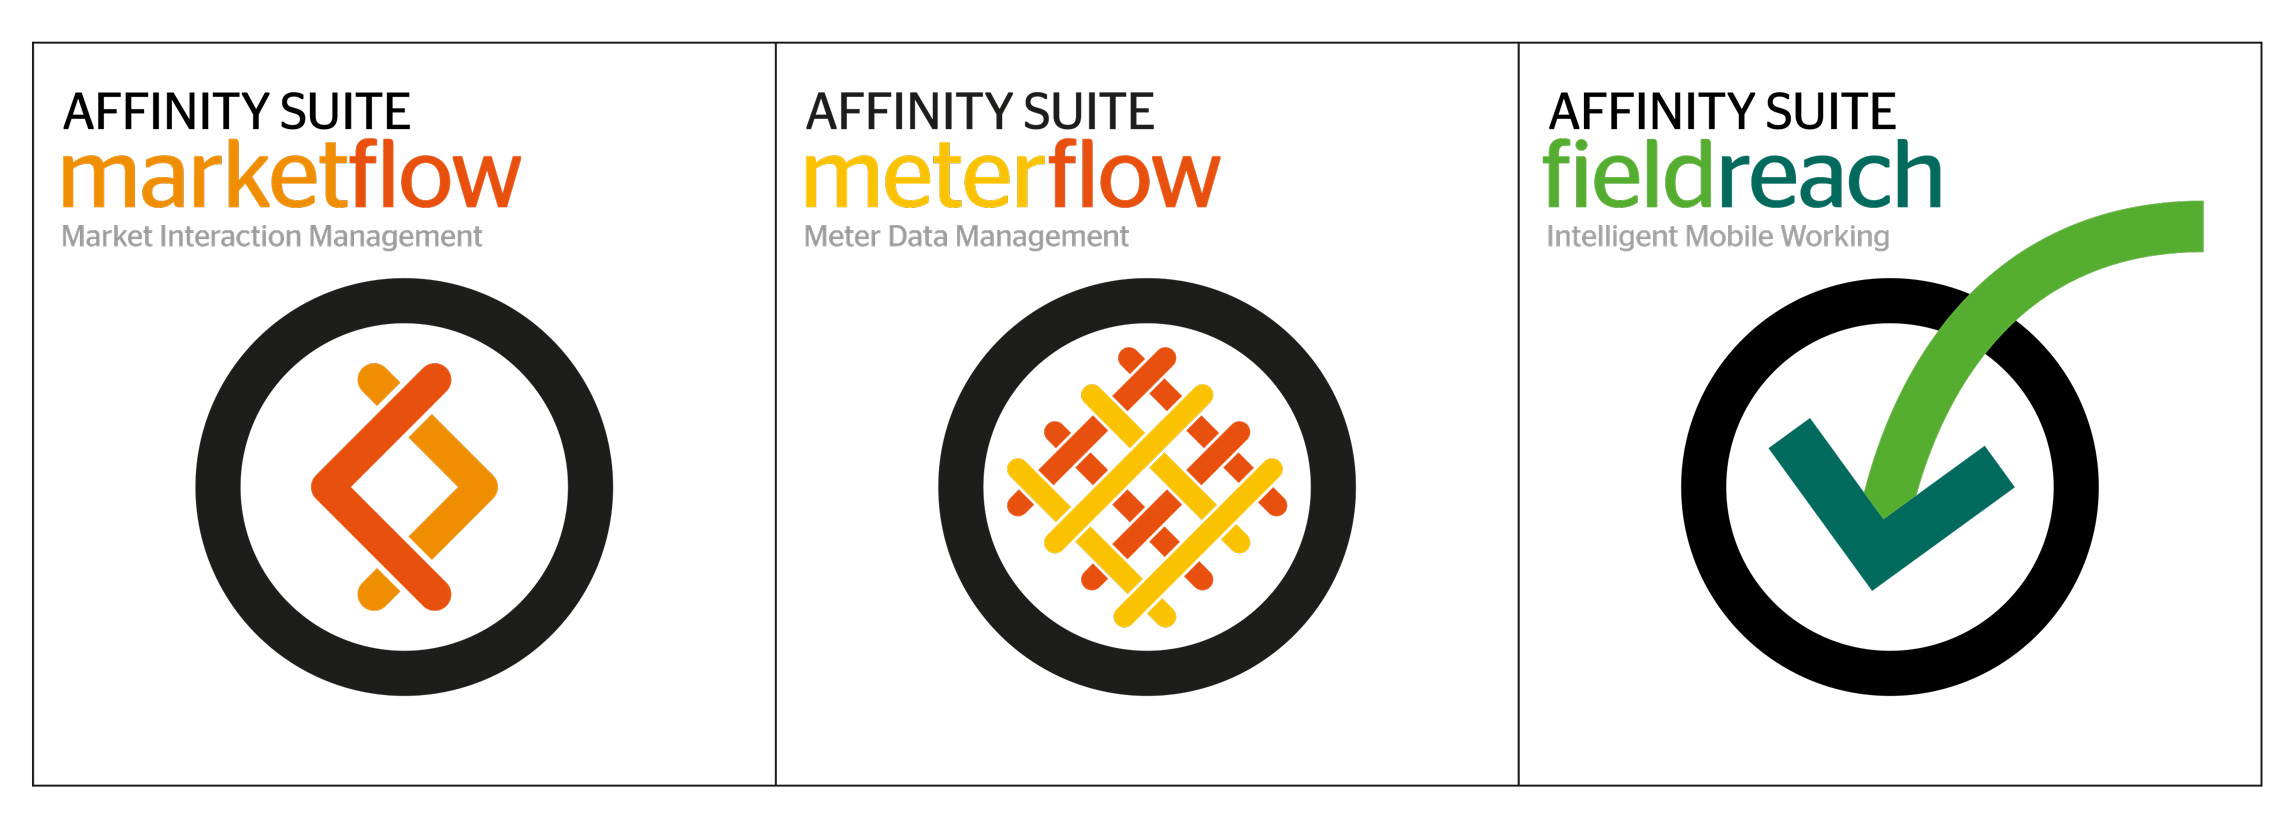 amt sybex technology rebrand product affinity suite 